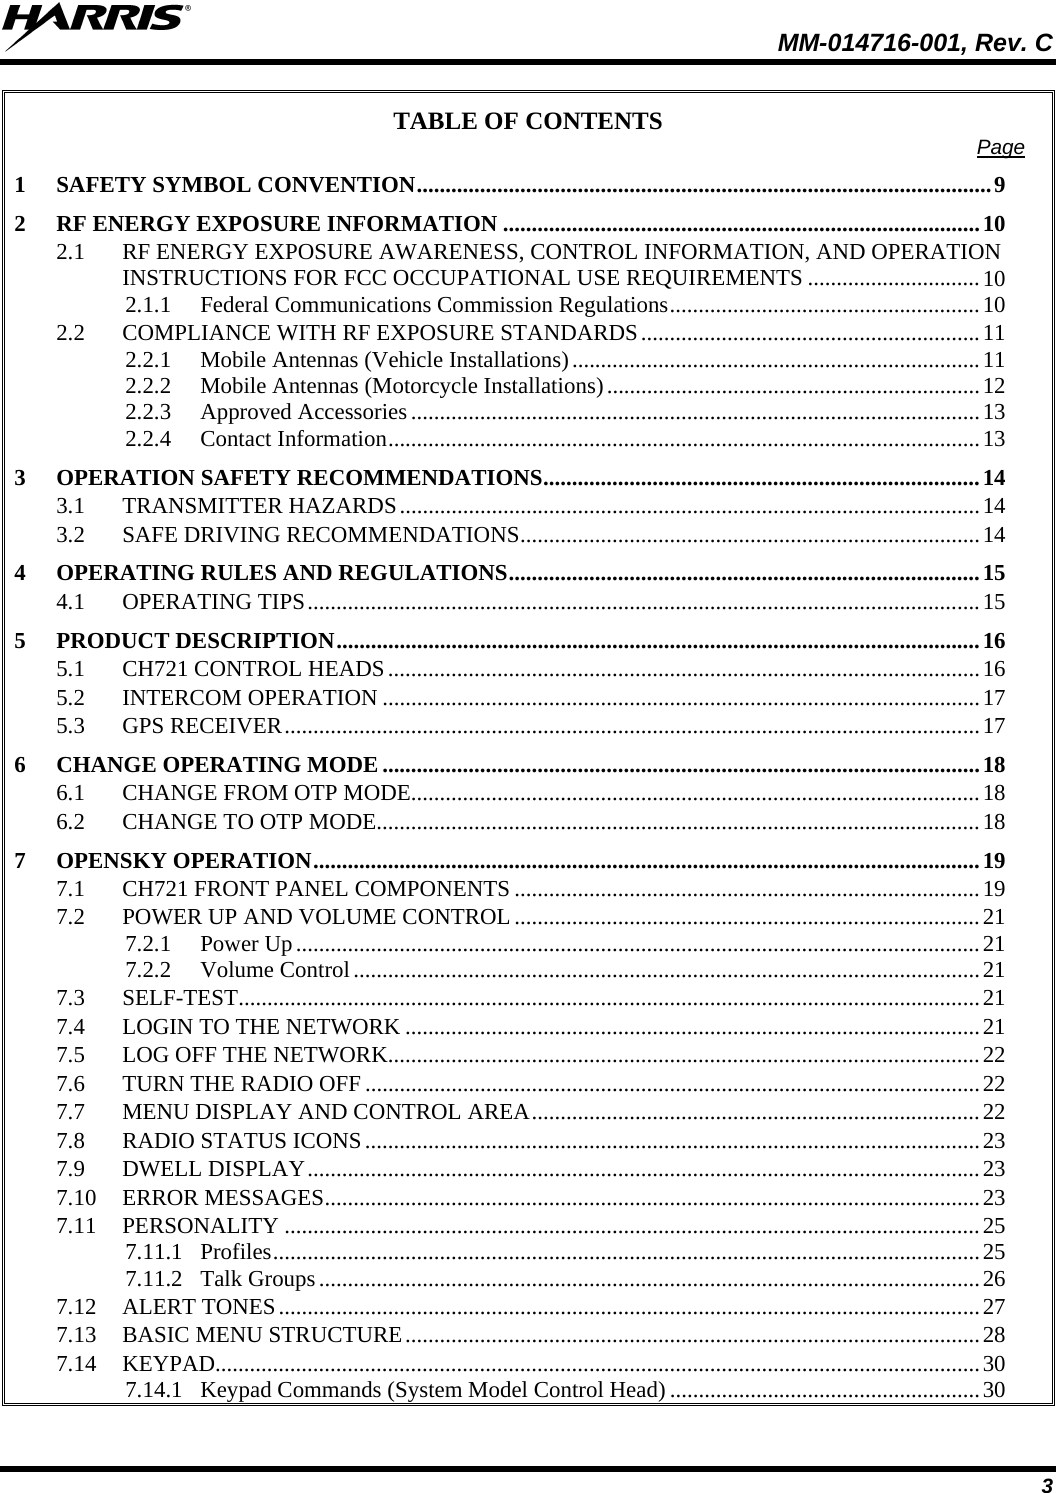  MM-014716-001, Rev. C 3 TABLE OF CONTENTS  Page 1 SAFETY SYMBOL CONVENTION....................................................................................................9 2 RF ENERGY EXPOSURE INFORMATION ...................................................................................10 2.1 RF ENERGY EXPOSURE AWARENESS, CONTROL INFORMATION, AND OPERATION INSTRUCTIONS FOR FCC OCCUPATIONAL USE REQUIREMENTS ..............................10 2.1.1 Federal Communications Commission Regulations......................................................10 2.2 COMPLIANCE WITH RF EXPOSURE STANDARDS...........................................................11 2.2.1 Mobile Antennas (Vehicle Installations).......................................................................11 2.2.2 Mobile Antennas (Motorcycle Installations).................................................................12 2.2.3 Approved Accessories ...................................................................................................13 2.2.4 Contact Information.......................................................................................................13 3 OPERATION SAFETY RECOMMENDATIONS............................................................................14 3.1 TRANSMITTER HAZARDS.....................................................................................................14 3.2 SAFE DRIVING RECOMMENDATIONS................................................................................14 4 OPERATING RULES AND REGULATIONS..................................................................................15 4.1 OPERATING TIPS.....................................................................................................................15 5 PRODUCT DESCRIPTION................................................................................................................16 5.1 CH721 CONTROL HEADS.......................................................................................................16 5.2 INTERCOM OPERATION ........................................................................................................17 5.3 GPS RECEIVER.........................................................................................................................17 6 CHANGE OPERATING MODE ........................................................................................................18 6.1 CHANGE FROM OTP MODE...................................................................................................18 6.2 CHANGE TO OTP MODE.........................................................................................................18 7 OPENSKY OPERATION....................................................................................................................19 7.1 CH721 FRONT PANEL COMPONENTS .................................................................................19 7.2 POWER UP AND VOLUME CONTROL .................................................................................21 7.2.1 Power Up.......................................................................................................................21 7.2.2 Volume Control.............................................................................................................21 7.3 SELF-TEST.................................................................................................................................21 7.4 LOGIN TO THE NETWORK ....................................................................................................21 7.5 LOG OFF THE NETWORK.......................................................................................................22 7.6 TURN THE RADIO OFF ...........................................................................................................22 7.7 MENU DISPLAY AND CONTROL AREA..............................................................................22 7.8 RADIO STATUS ICONS...........................................................................................................23 7.9 DWELL DISPLAY.....................................................................................................................23 7.10 ERROR MESSAGES..................................................................................................................23 7.11 PERSONALITY .........................................................................................................................25 7.11.1 Profiles...........................................................................................................................25 7.11.2 Talk Groups...................................................................................................................26 7.12 ALERT TONES..........................................................................................................................27 7.13 BASIC MENU STRUCTURE....................................................................................................28 7.14 KEYPAD.....................................................................................................................................30 7.14.1 Keypad Commands (System Model Control Head) ......................................................30 